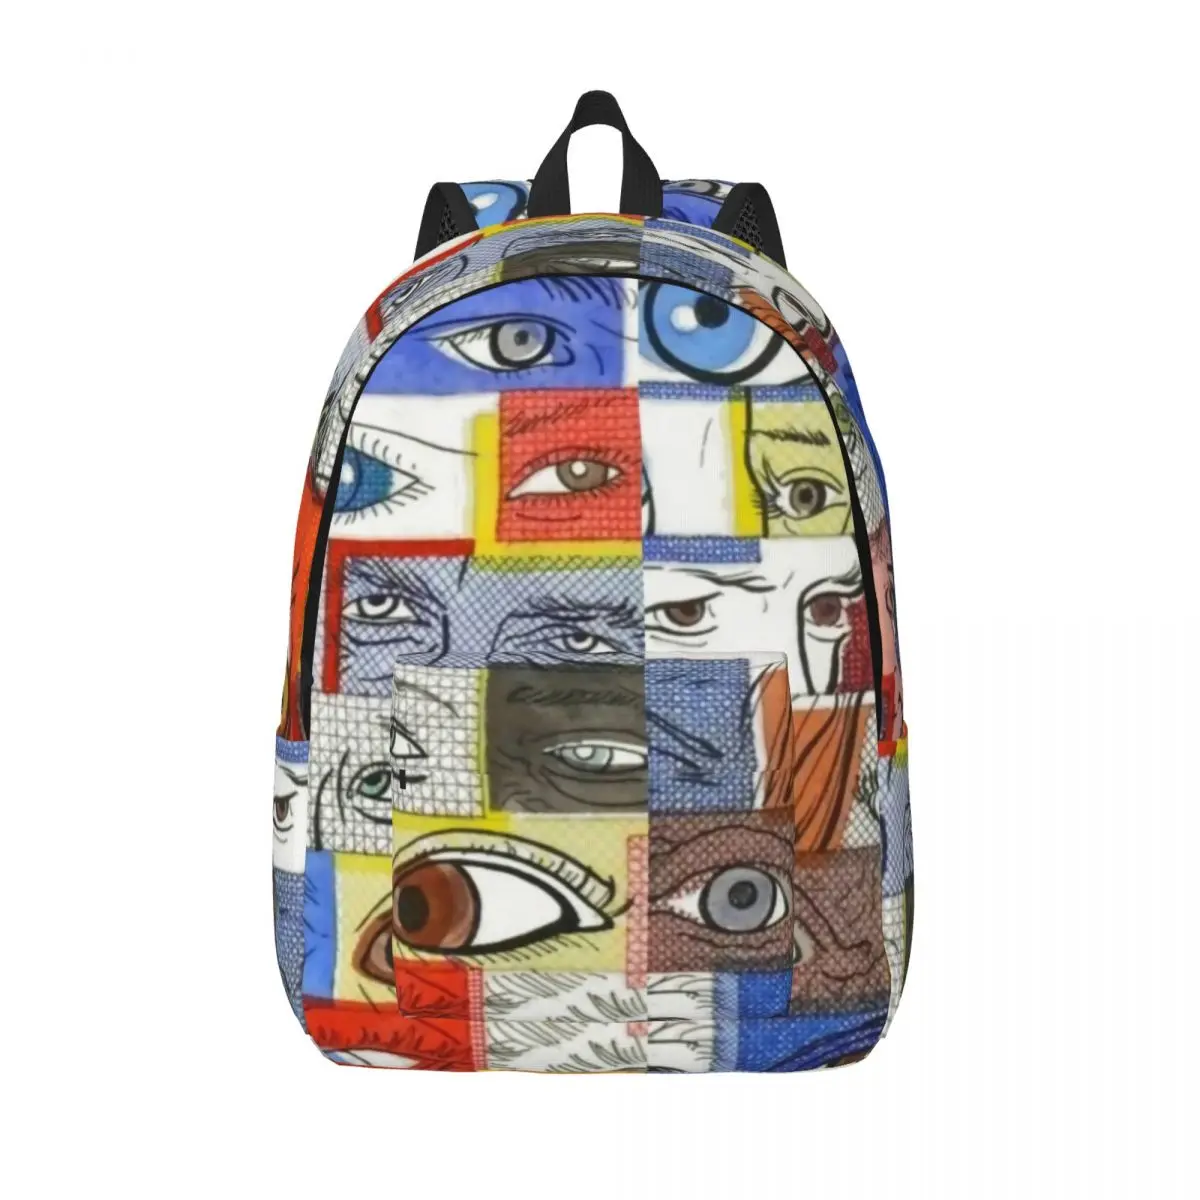 

Blues And Silver Eyes Vintage Canvas Backpacks Fun Crazy Wild and Unique Eyeballs Drawings Big Kawaii Backpack Summer Bags